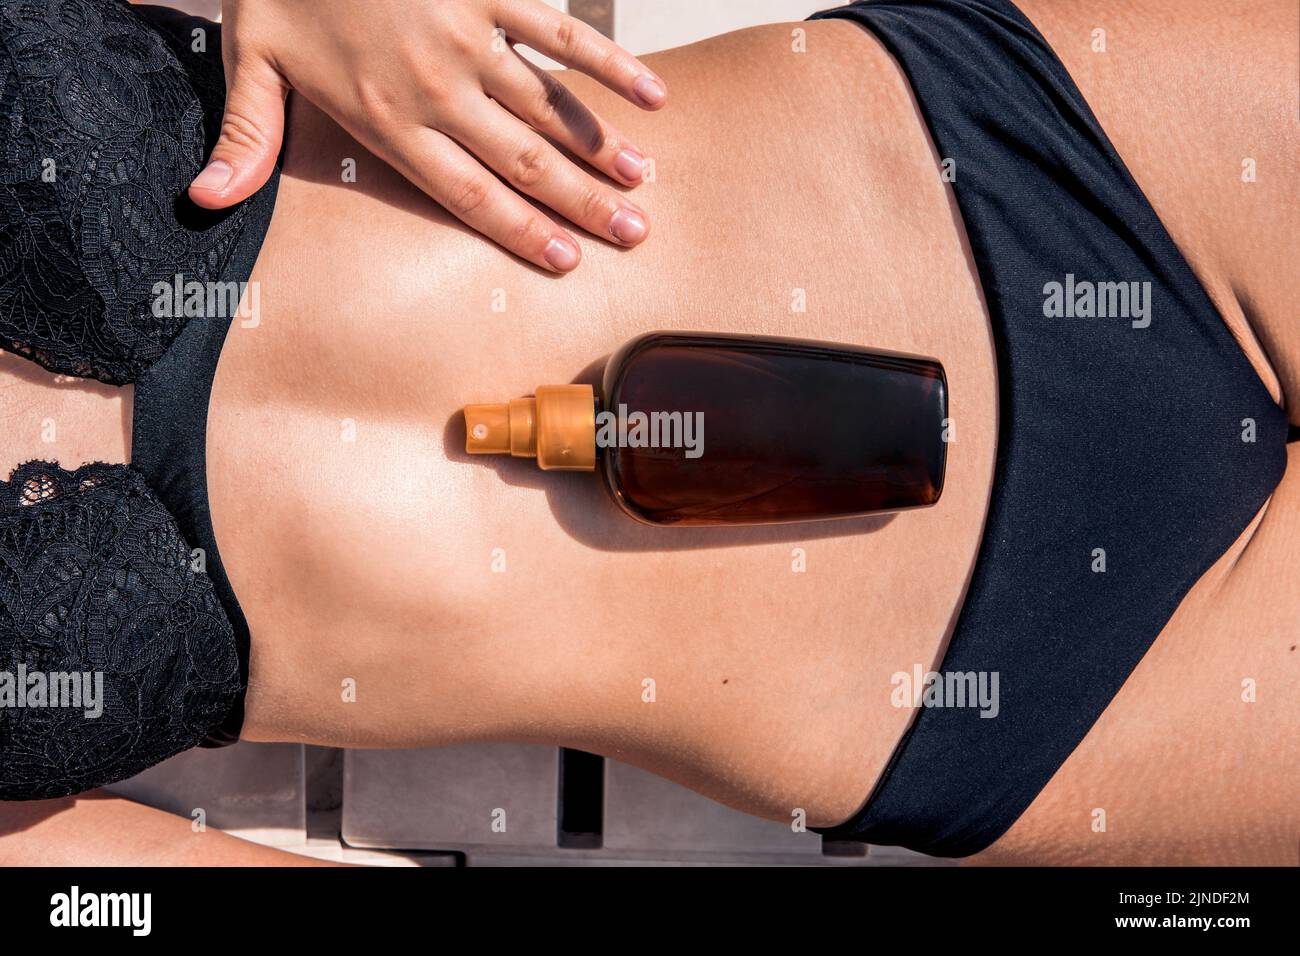 Girl oil spray tanning her legs protection from the sun's uv rays putting sunscreen lotion sunblock. Woman rubs sunscreen into the skin on her stomach Stock Photo